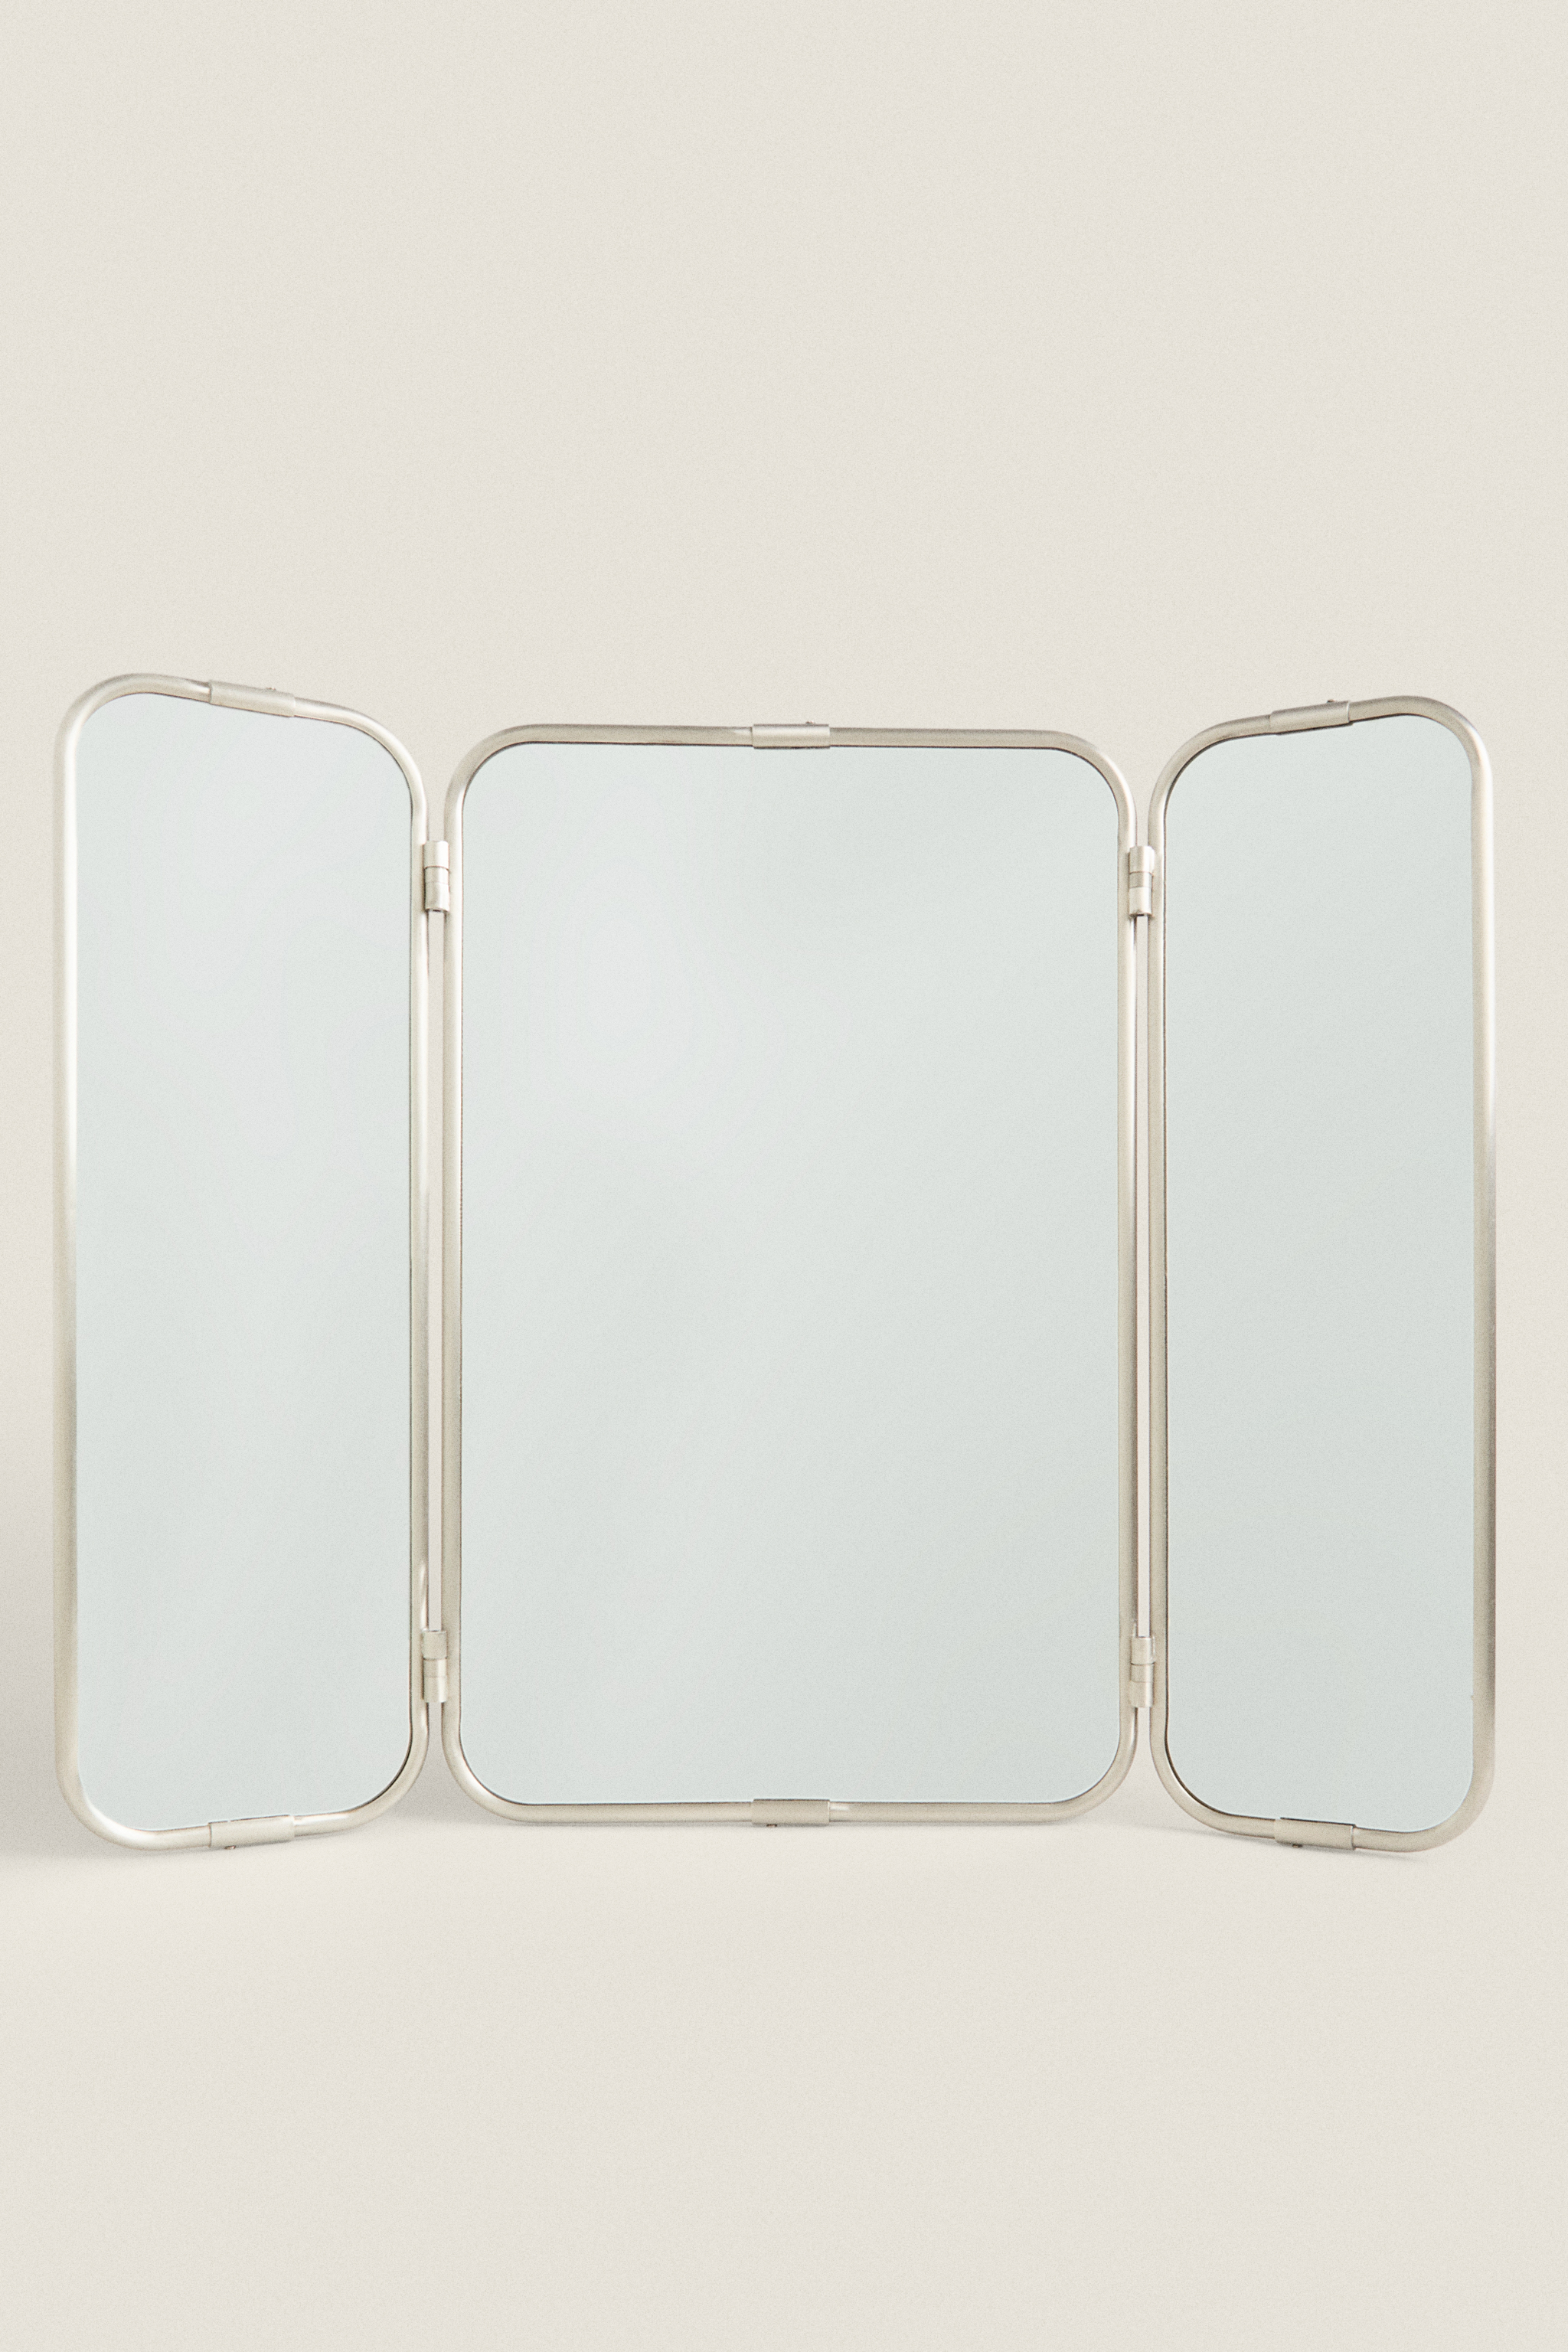 TRIPTYCH WALL MIRROR WITH SILVER FRAME